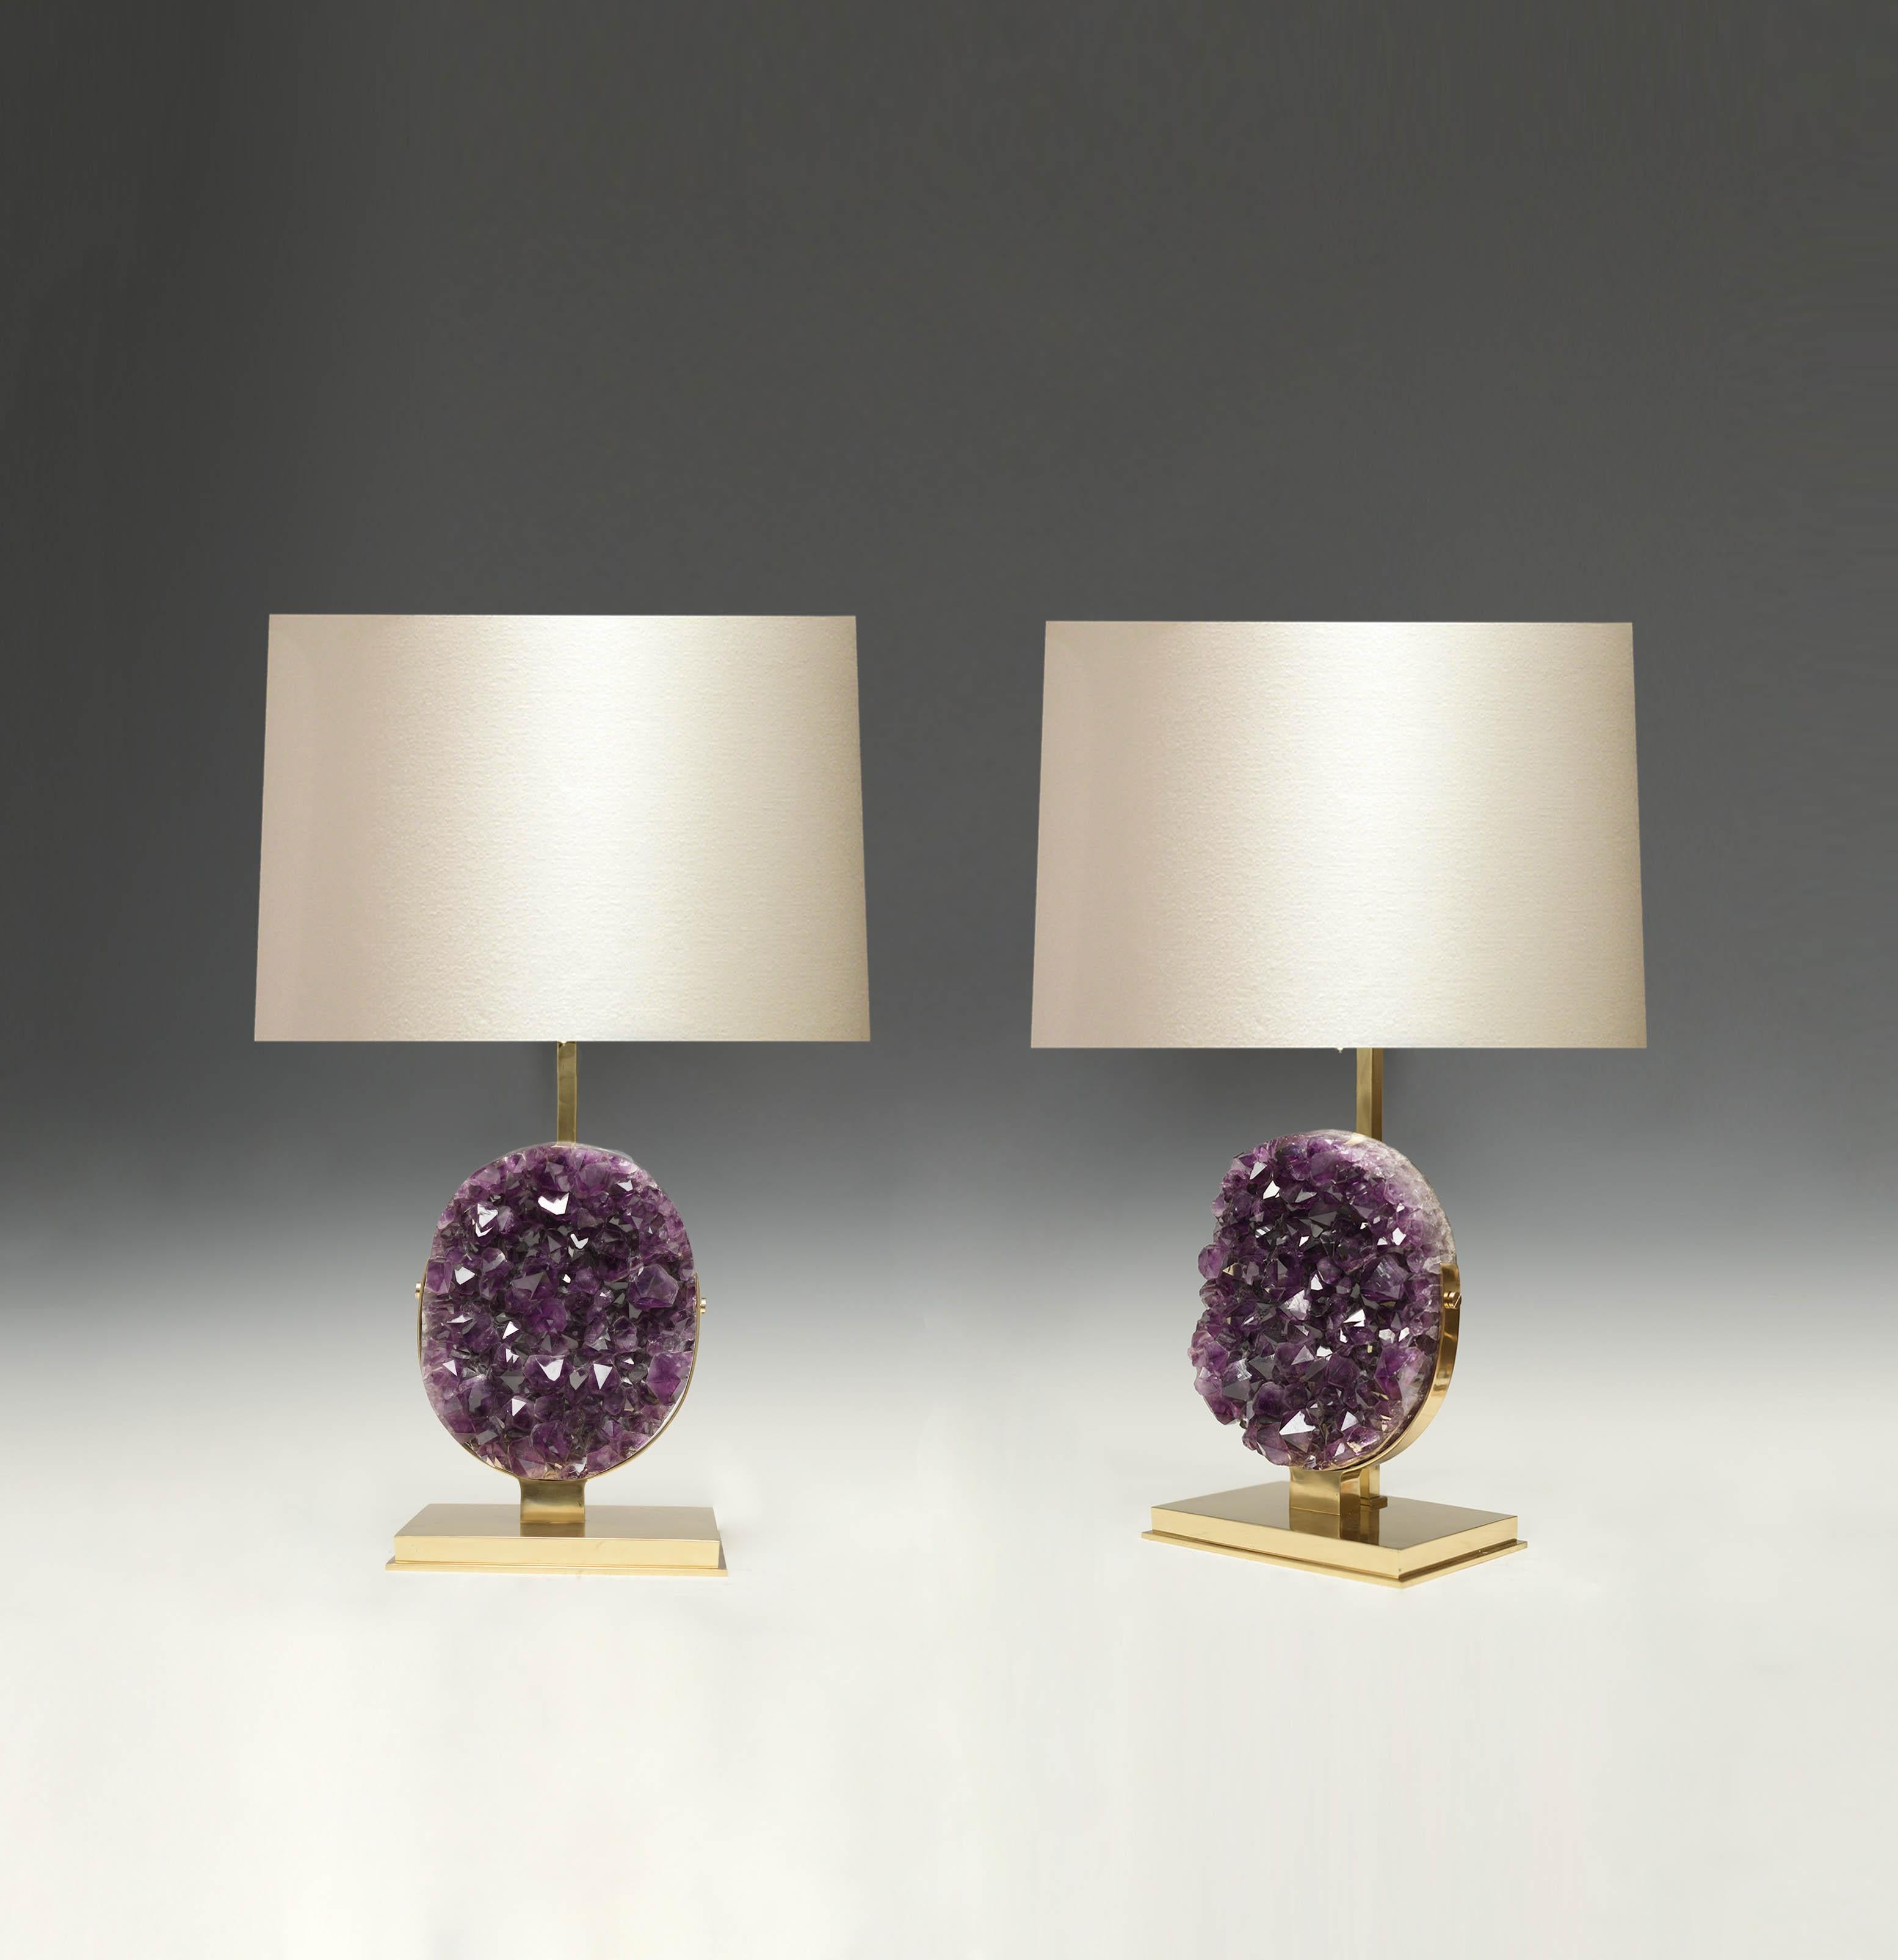 Pair of natural amethyst sculptures mount as lamps with polish brass stands. Created by Phoenix gallery NYC.
To the top of amethyst is 12.25in.
Each lamp installs two sockets.
Lampshade do not include.